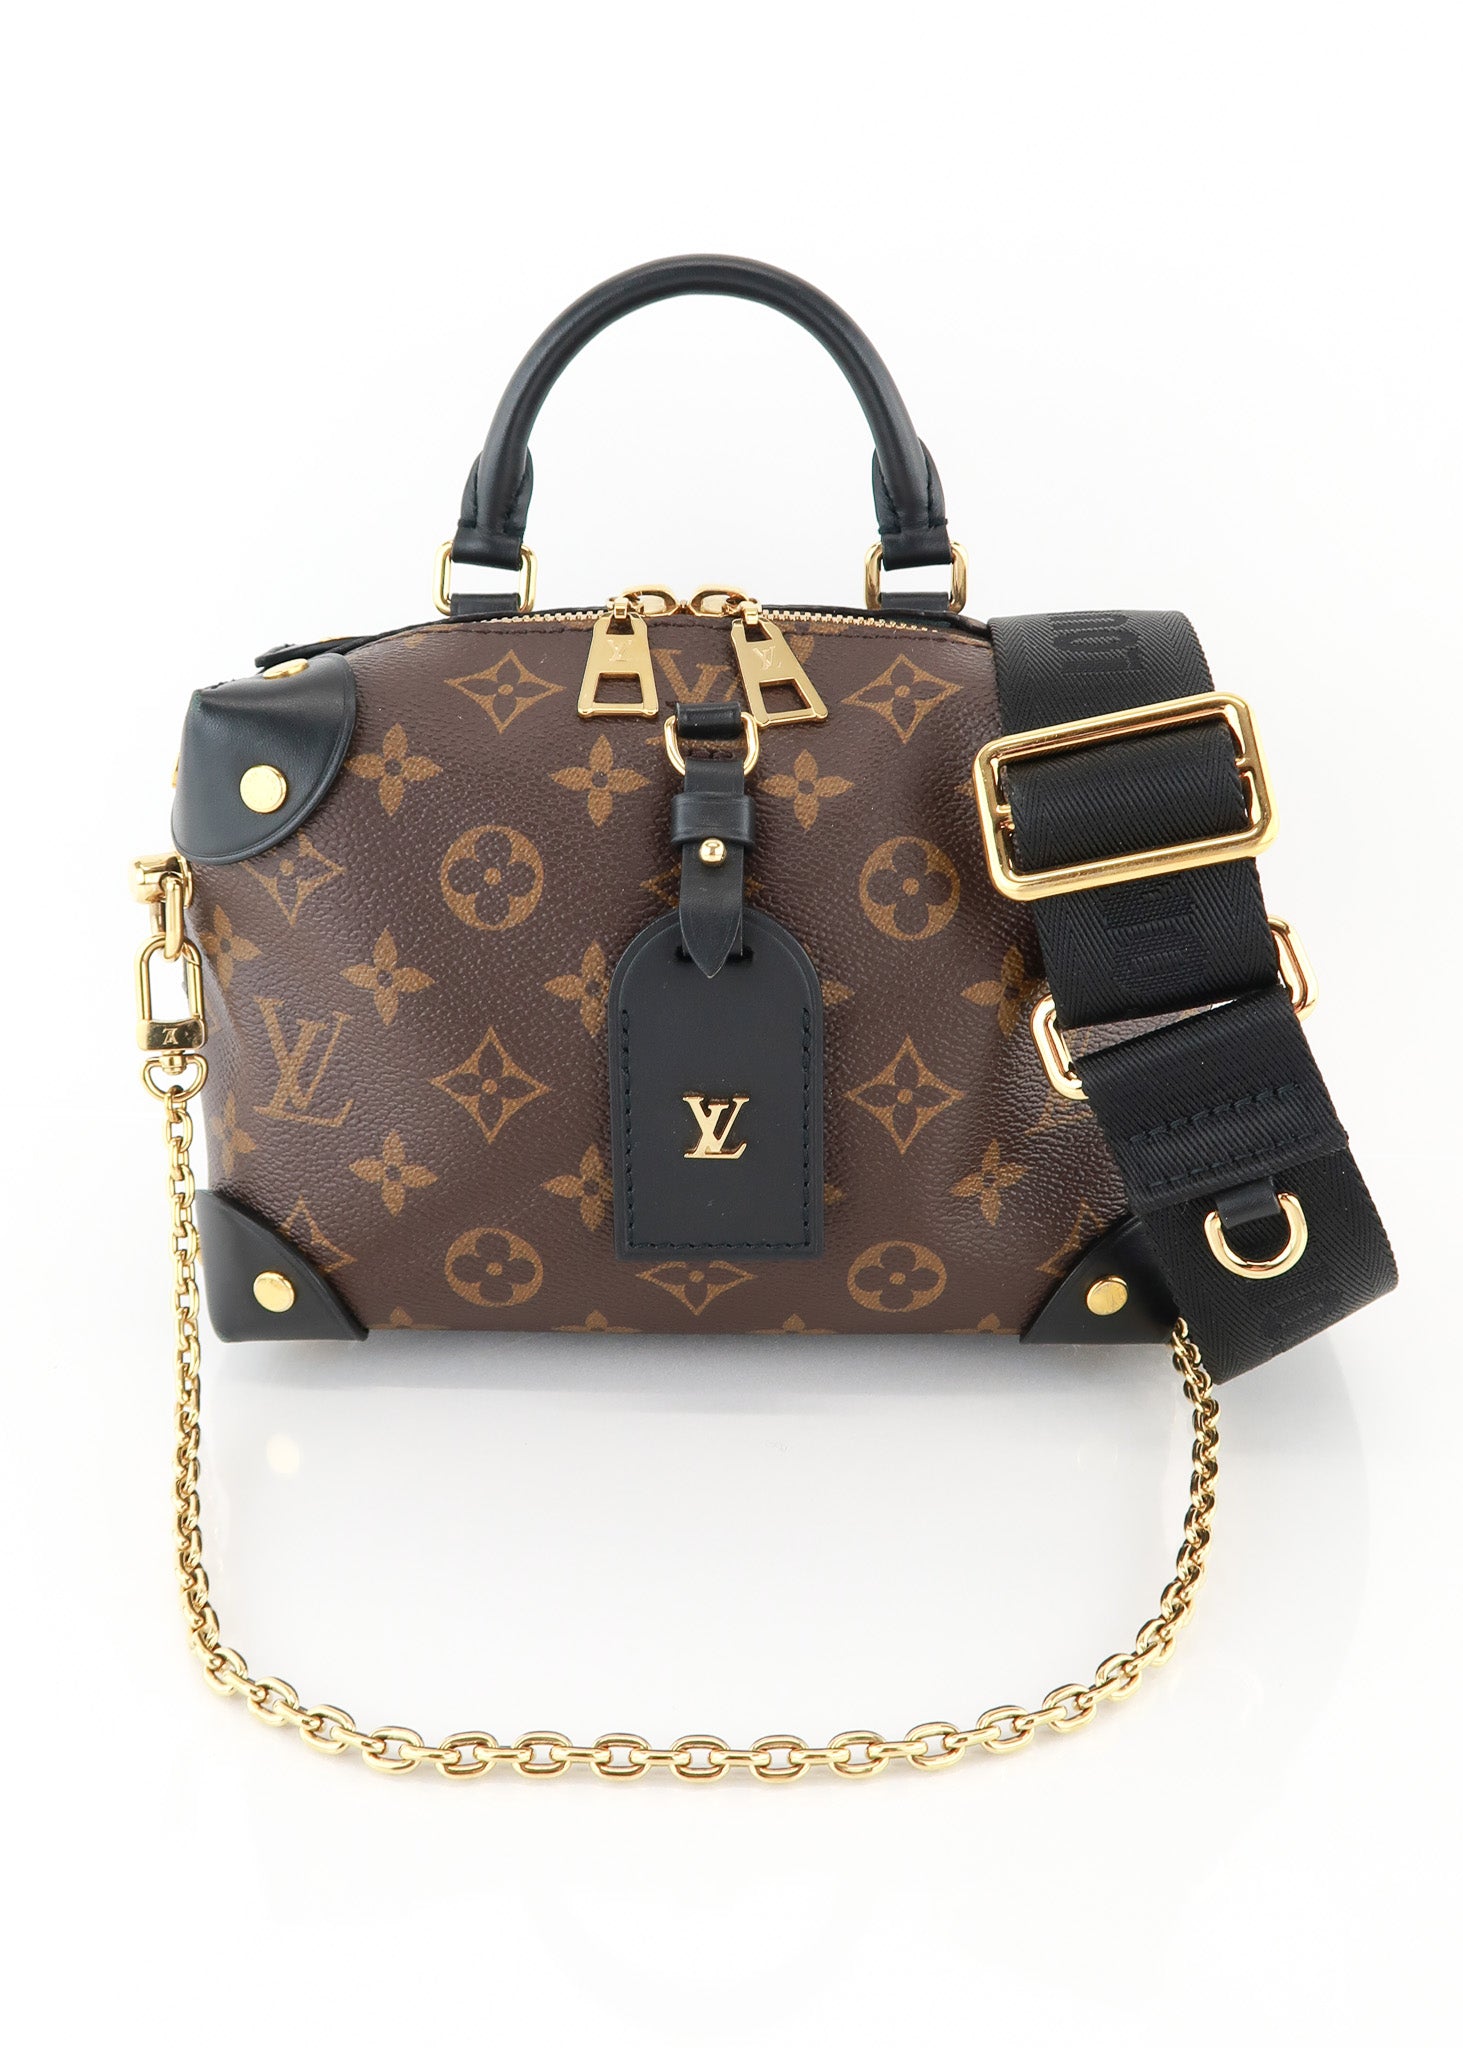 Let me know what you think about the petite malle souple 🤔 : r/Louisvuitton